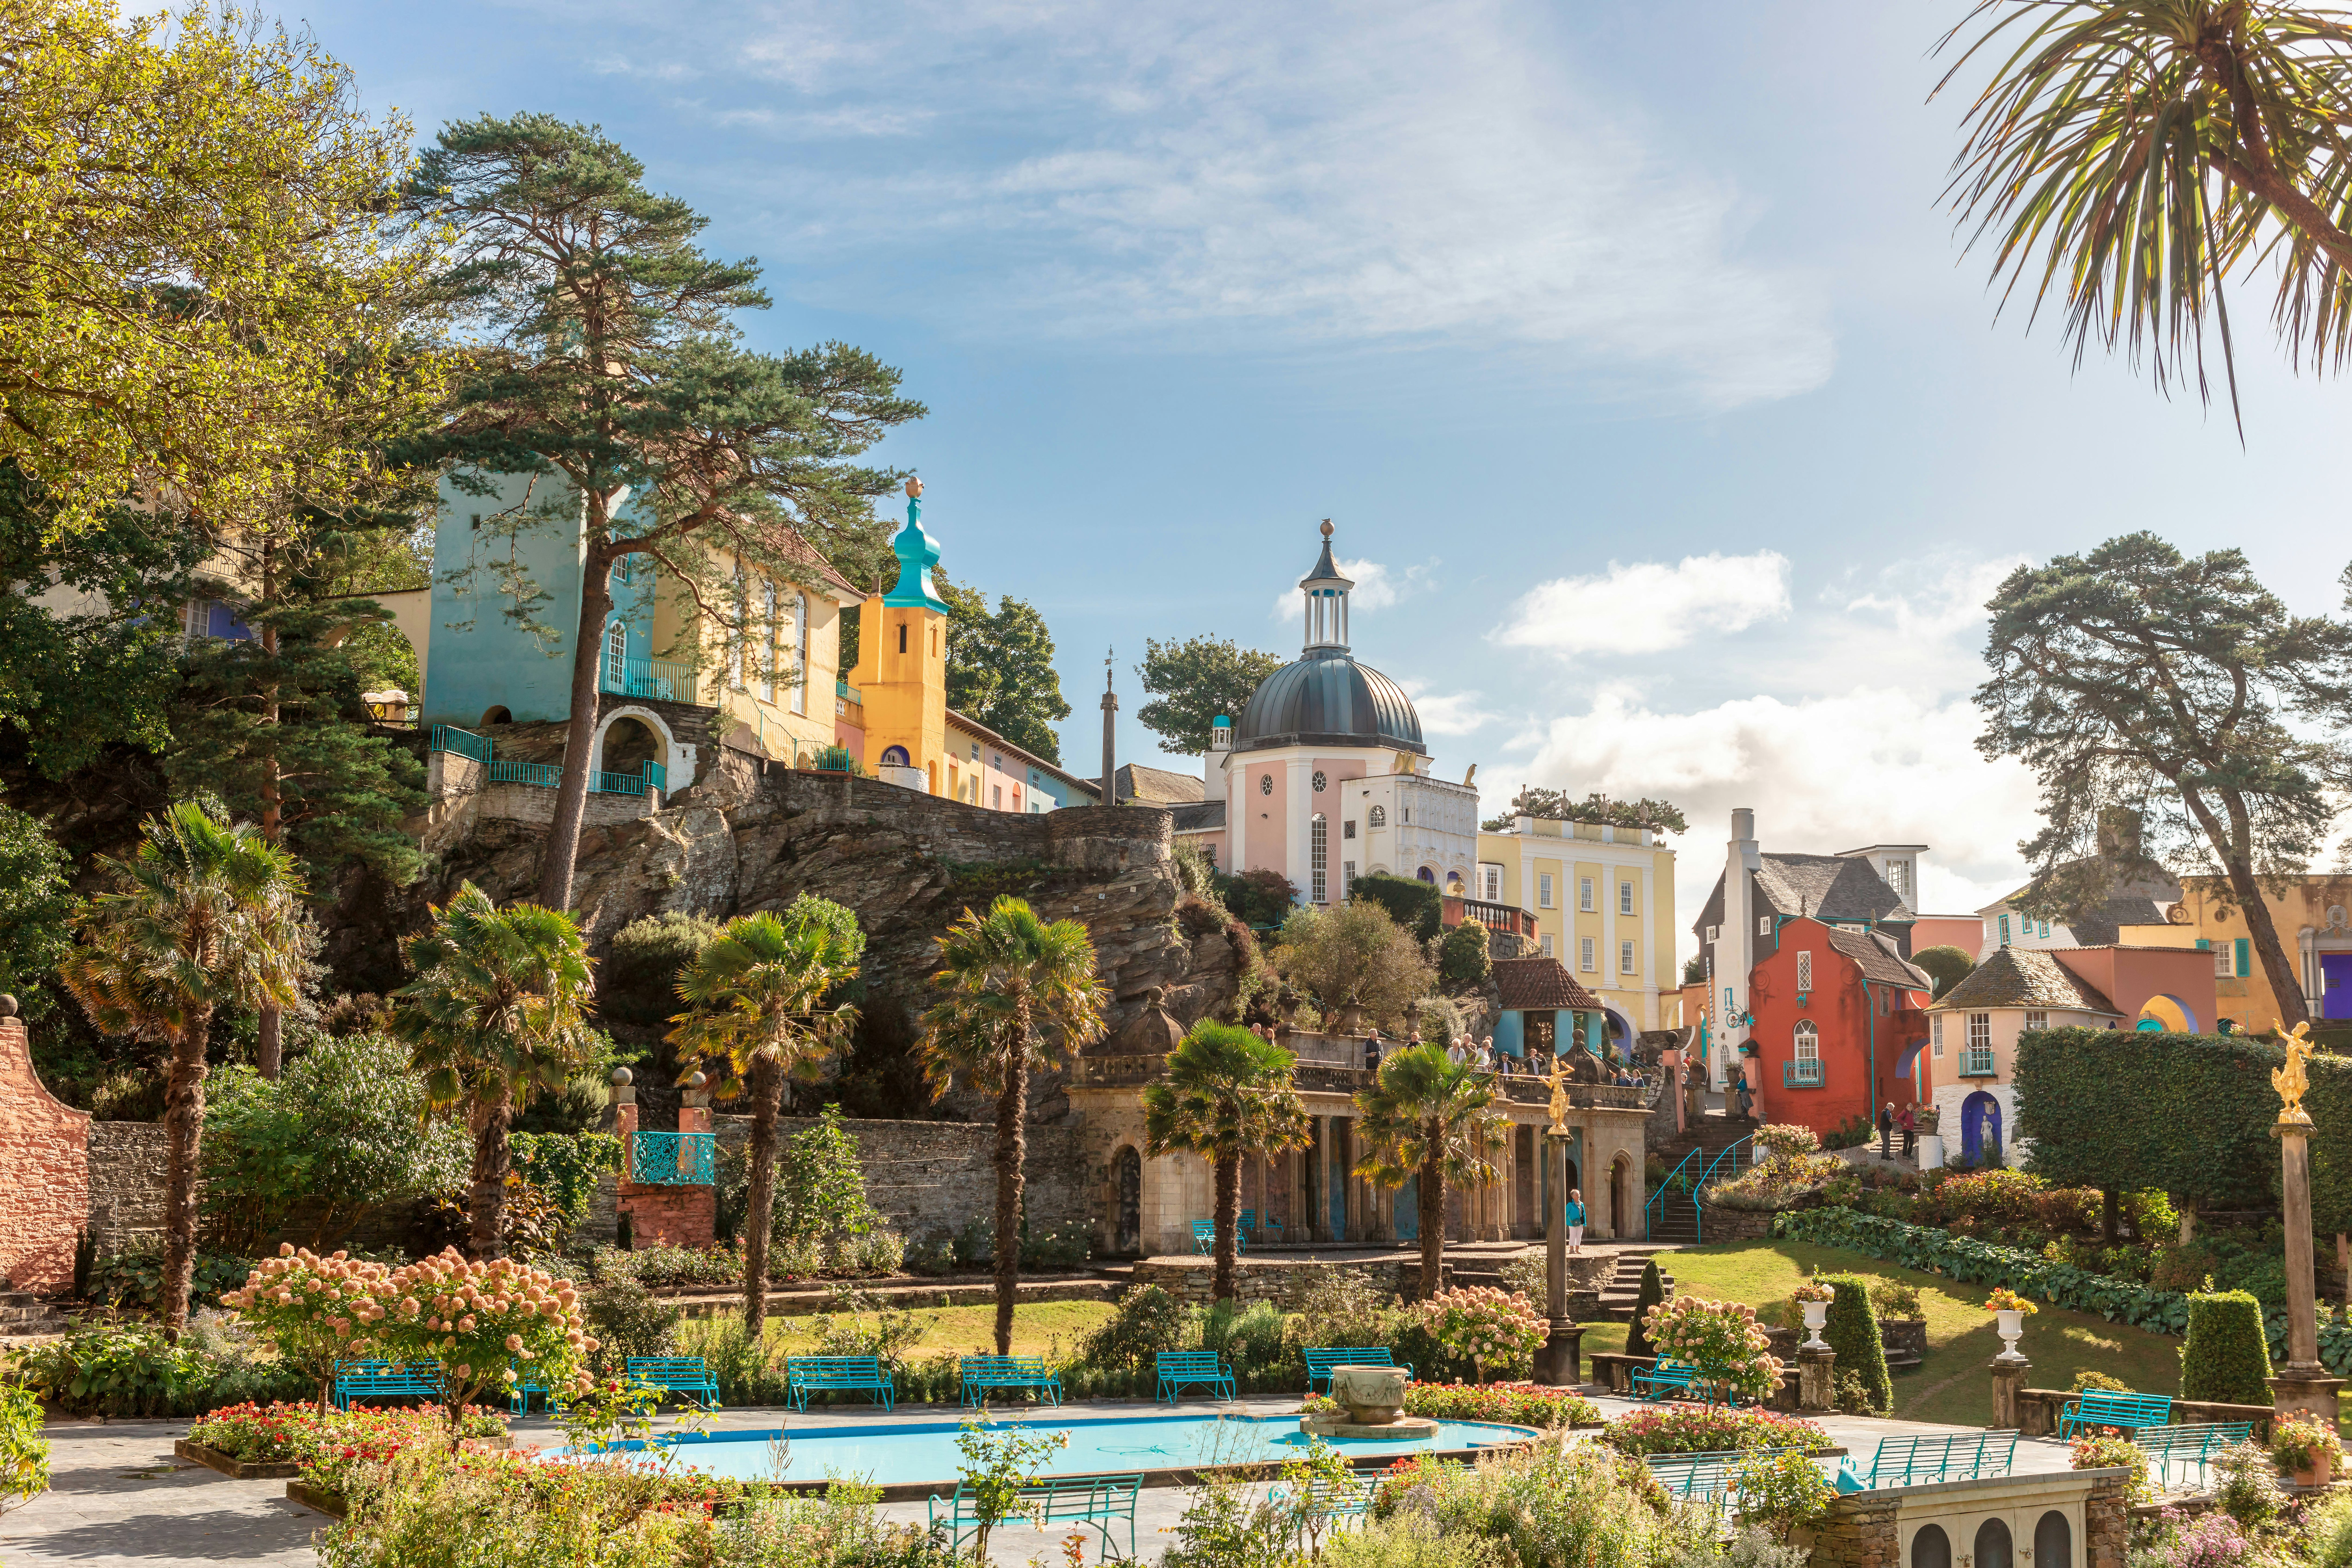 A park in Portmeirion; it has been planted with Mediterranean-style trees and plants, and it's surrounded by several elevated, brightly coloured buildings, giving the impression of an Italian hilltop town.